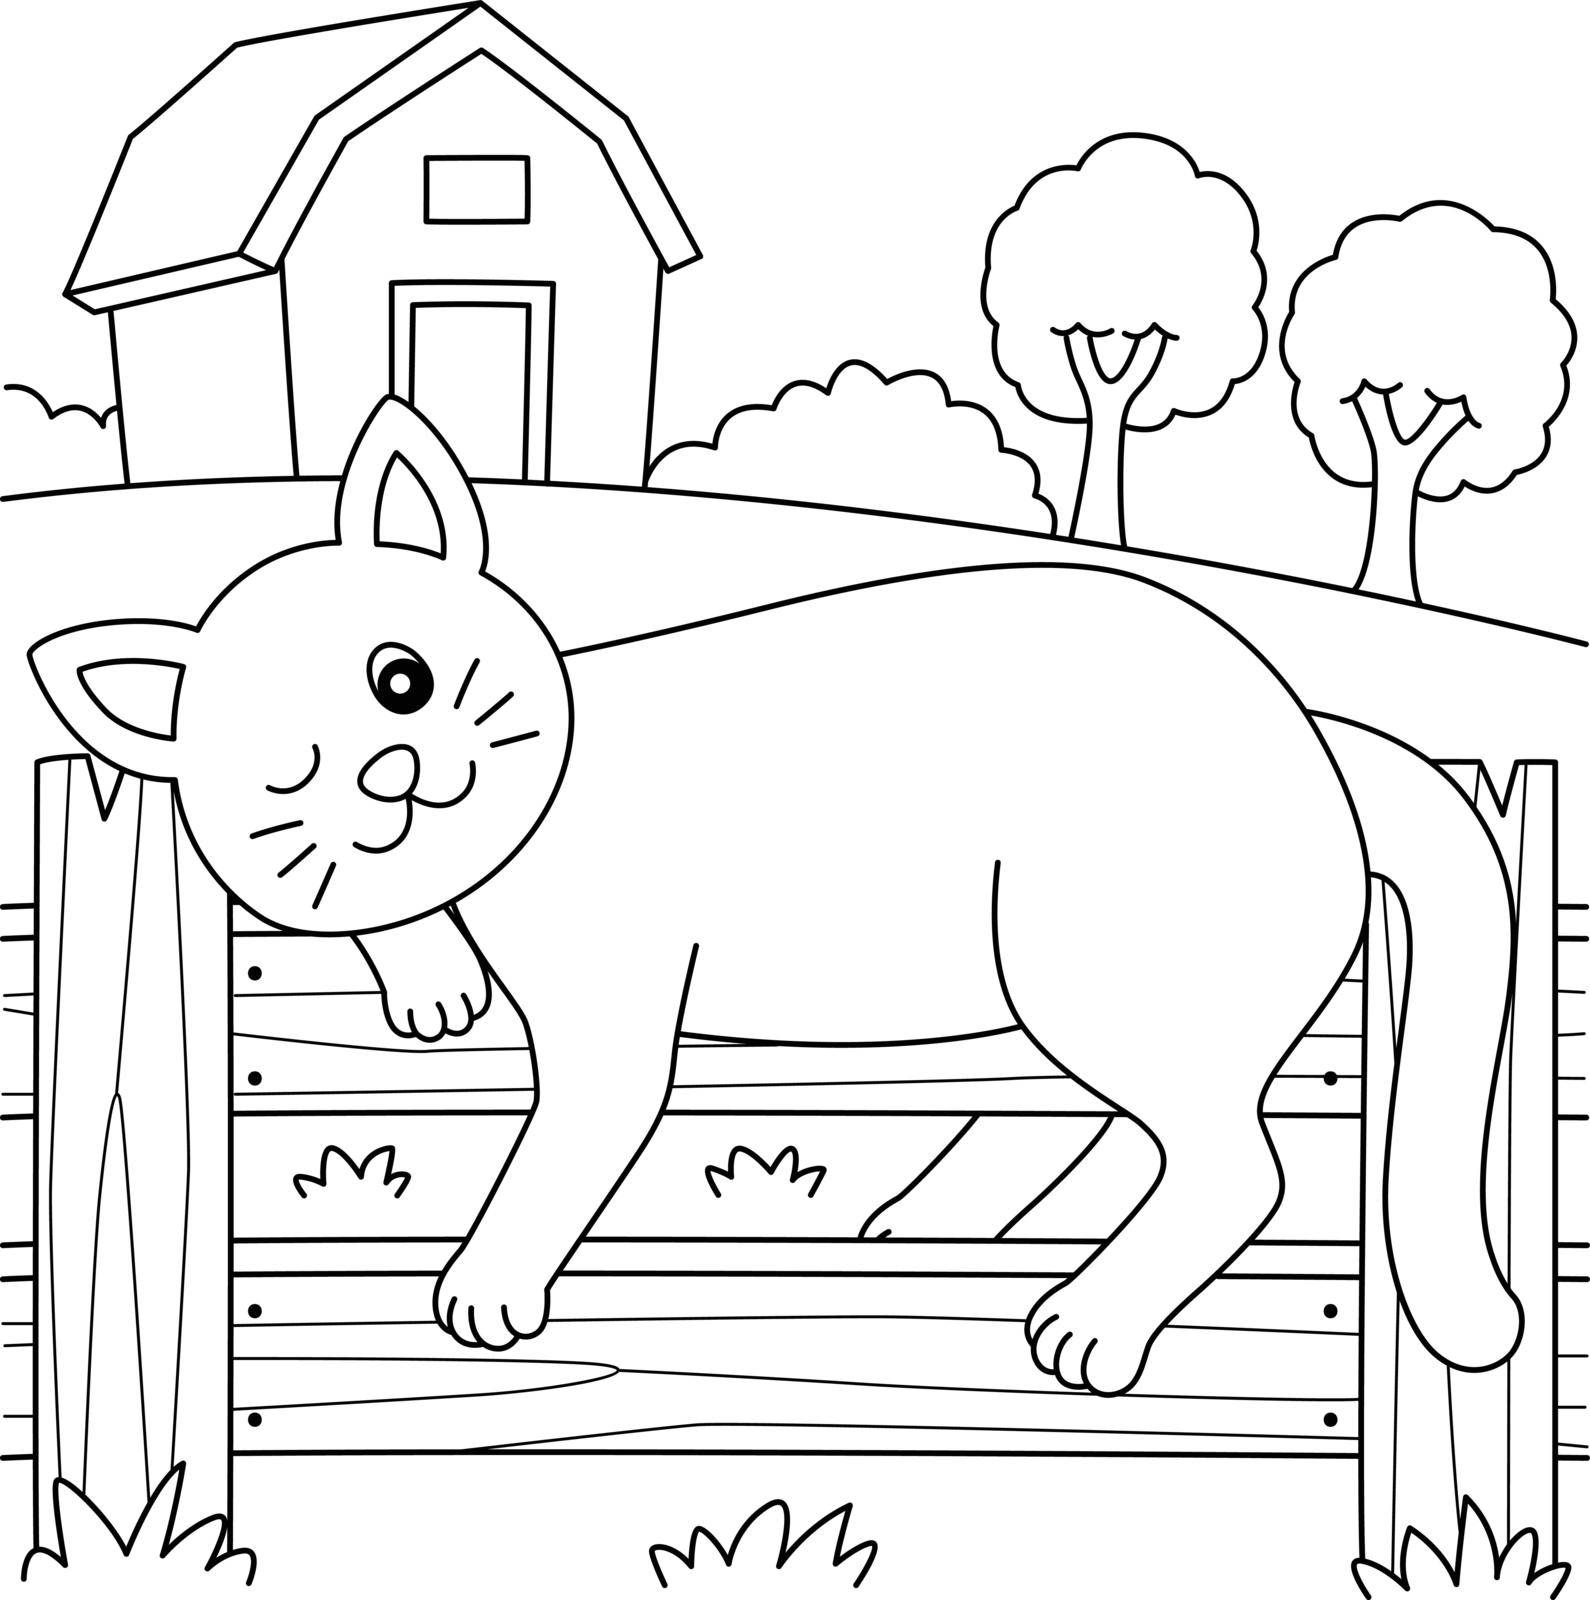 A cute and funny coloring page of a cat farm animal. Provides hours of coloring fun for children. To color, this page is very easy. Suitable for little kids and toddlers.